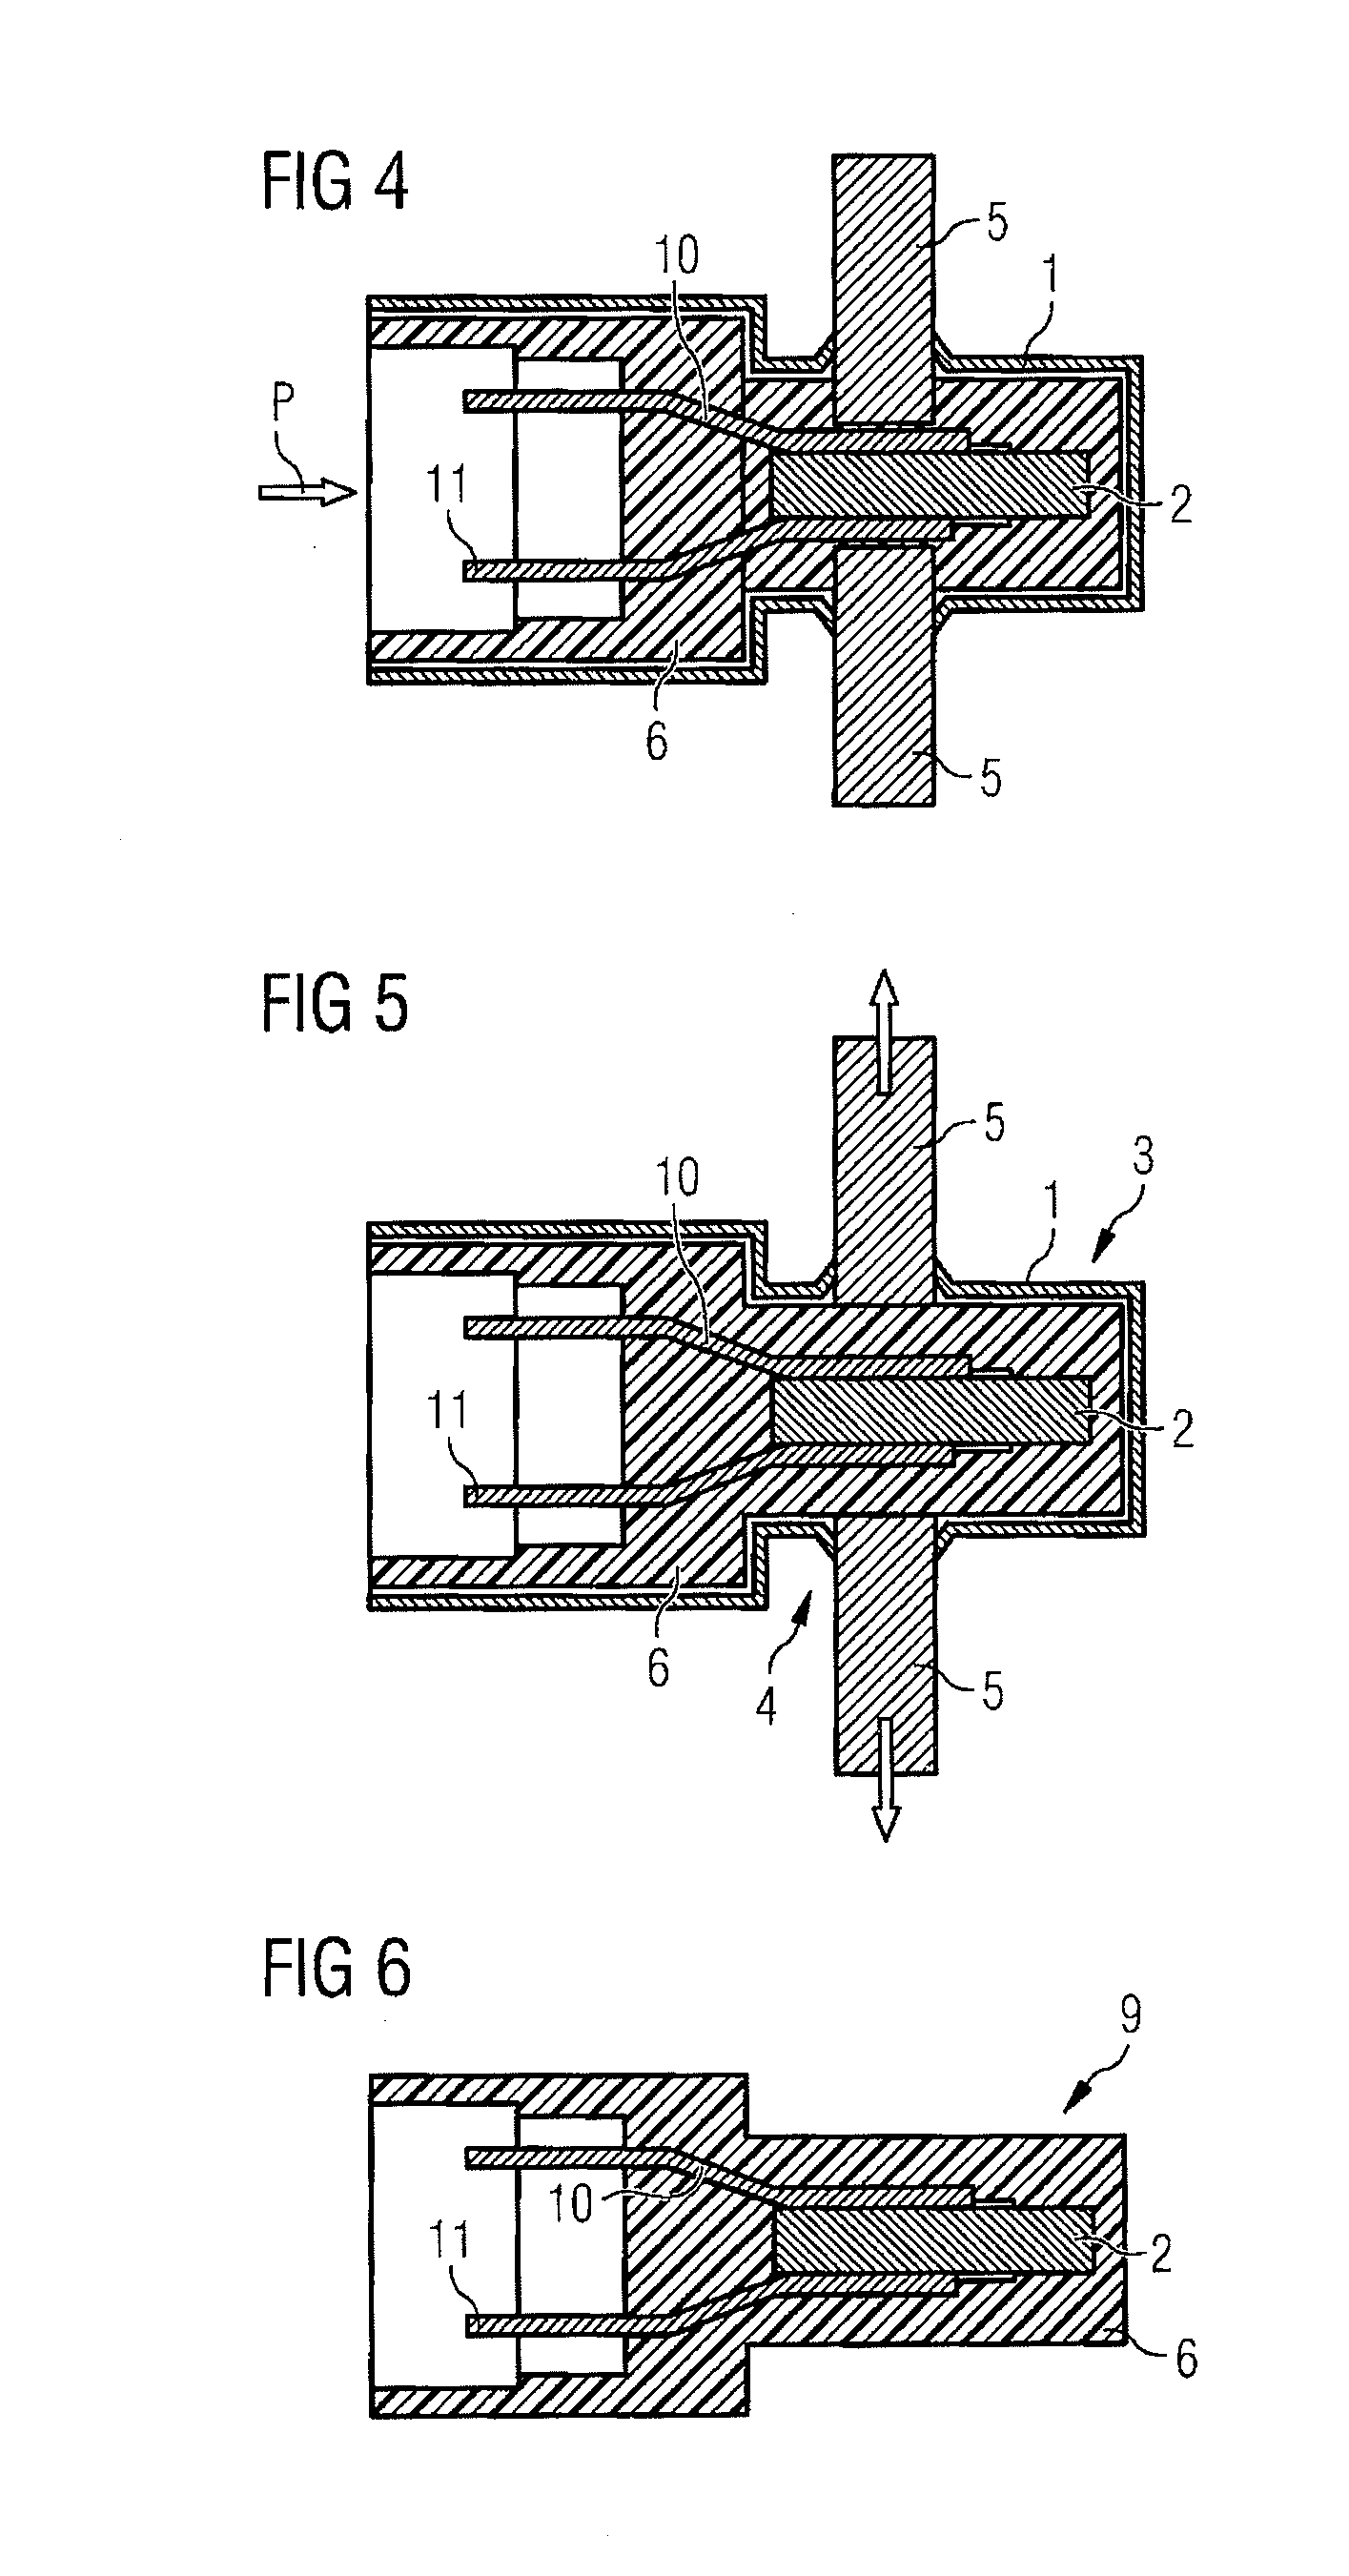 Method for Producing a Sensor with Seamless Extrusion Coating of a Sensor Element